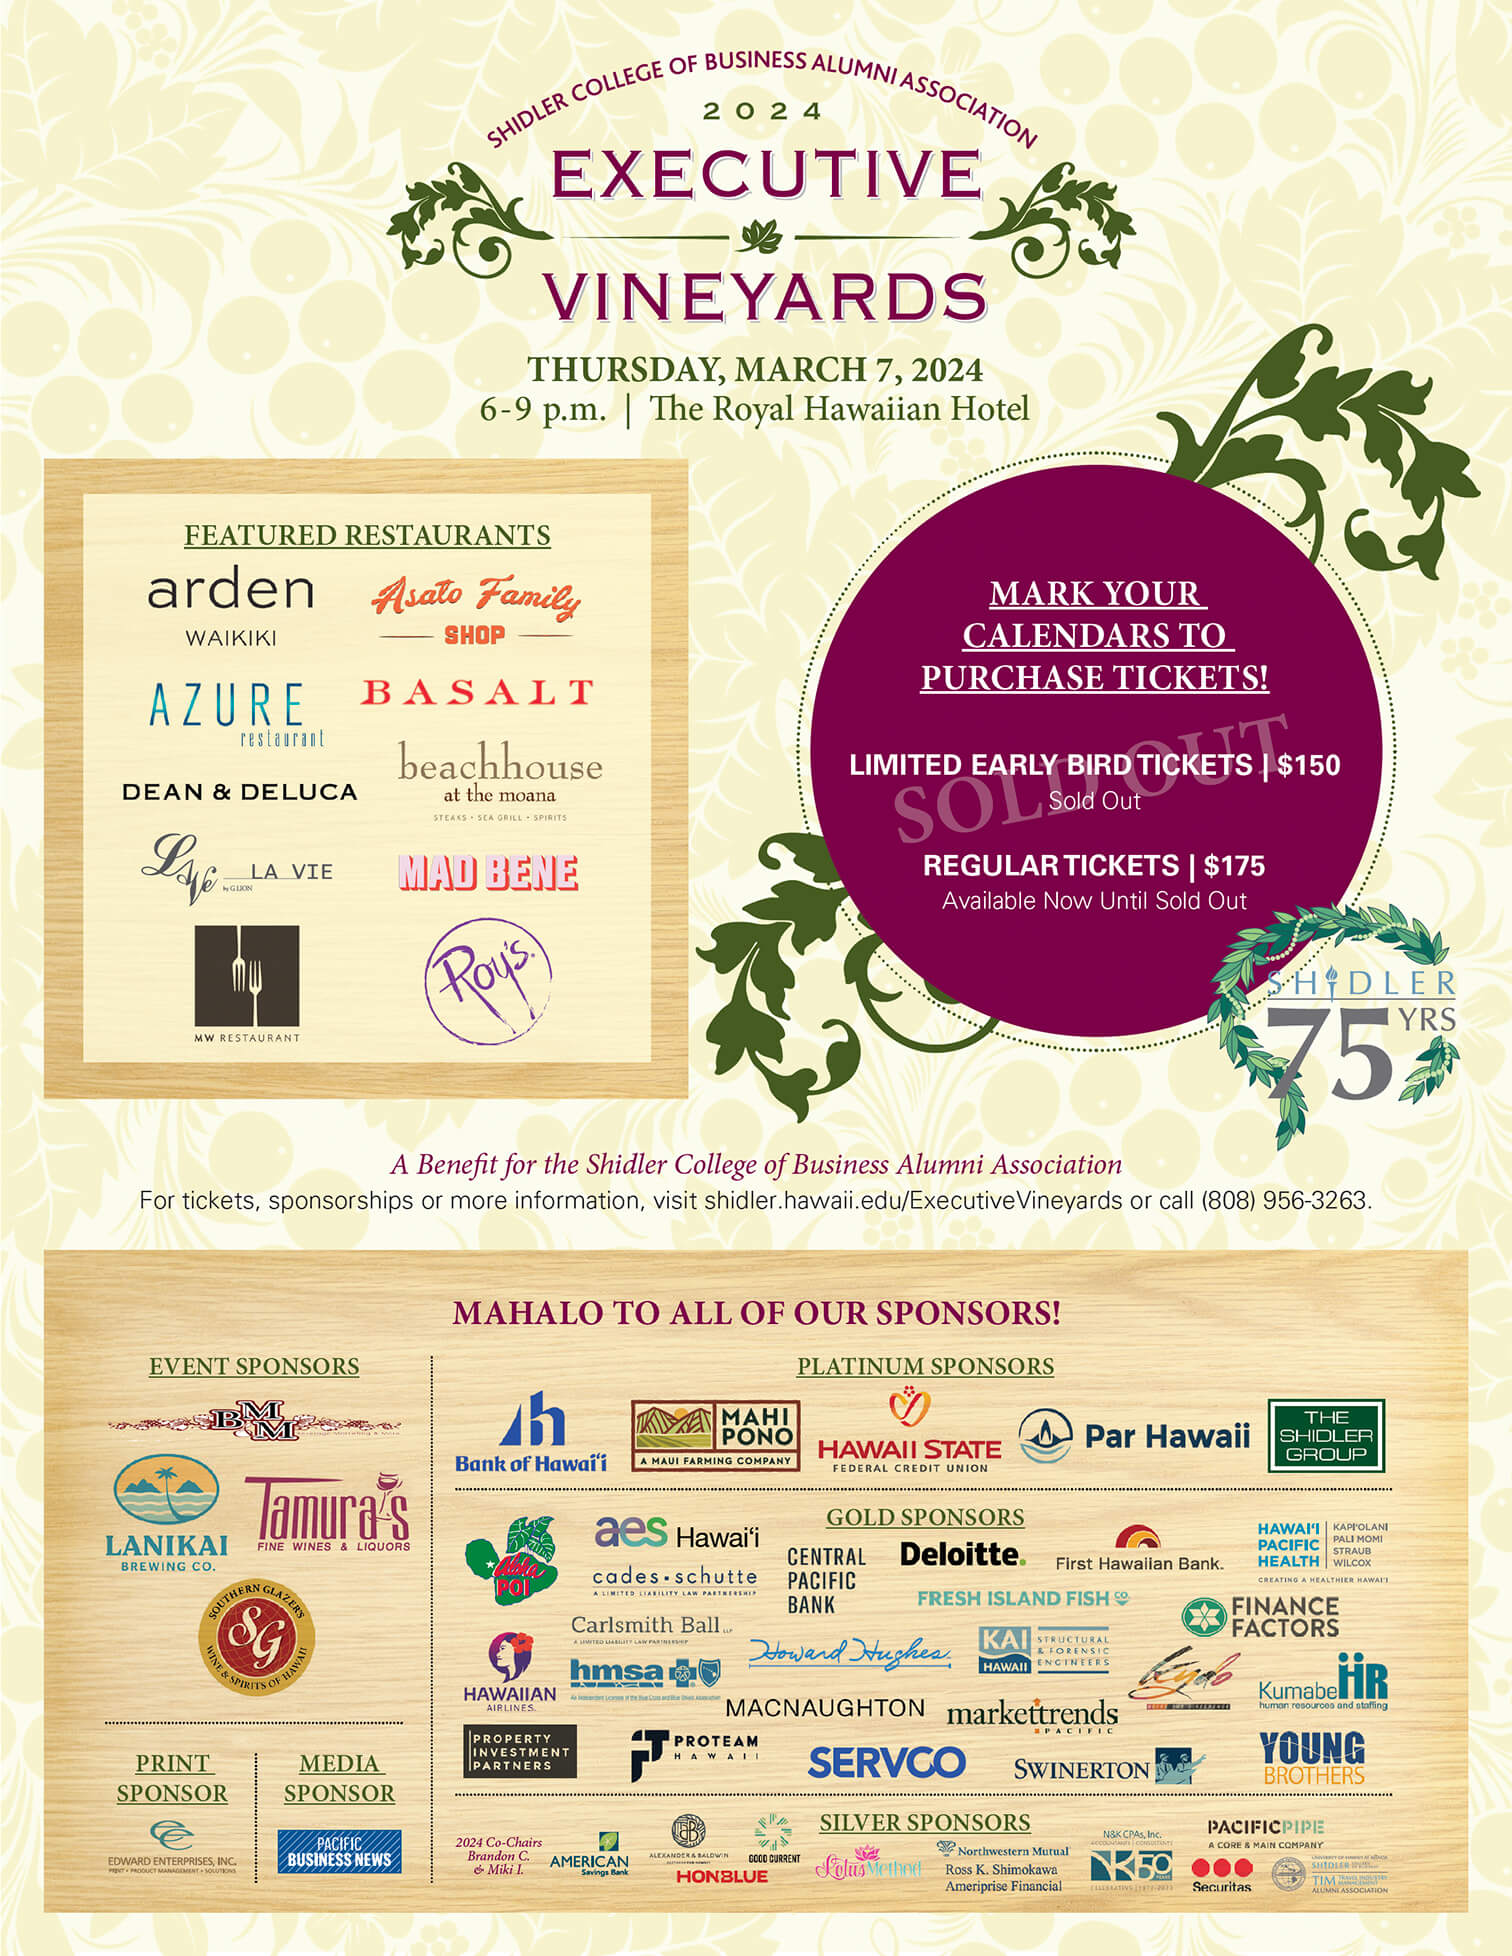 Screenshtot of this year's Executive Vineyards Flyer.